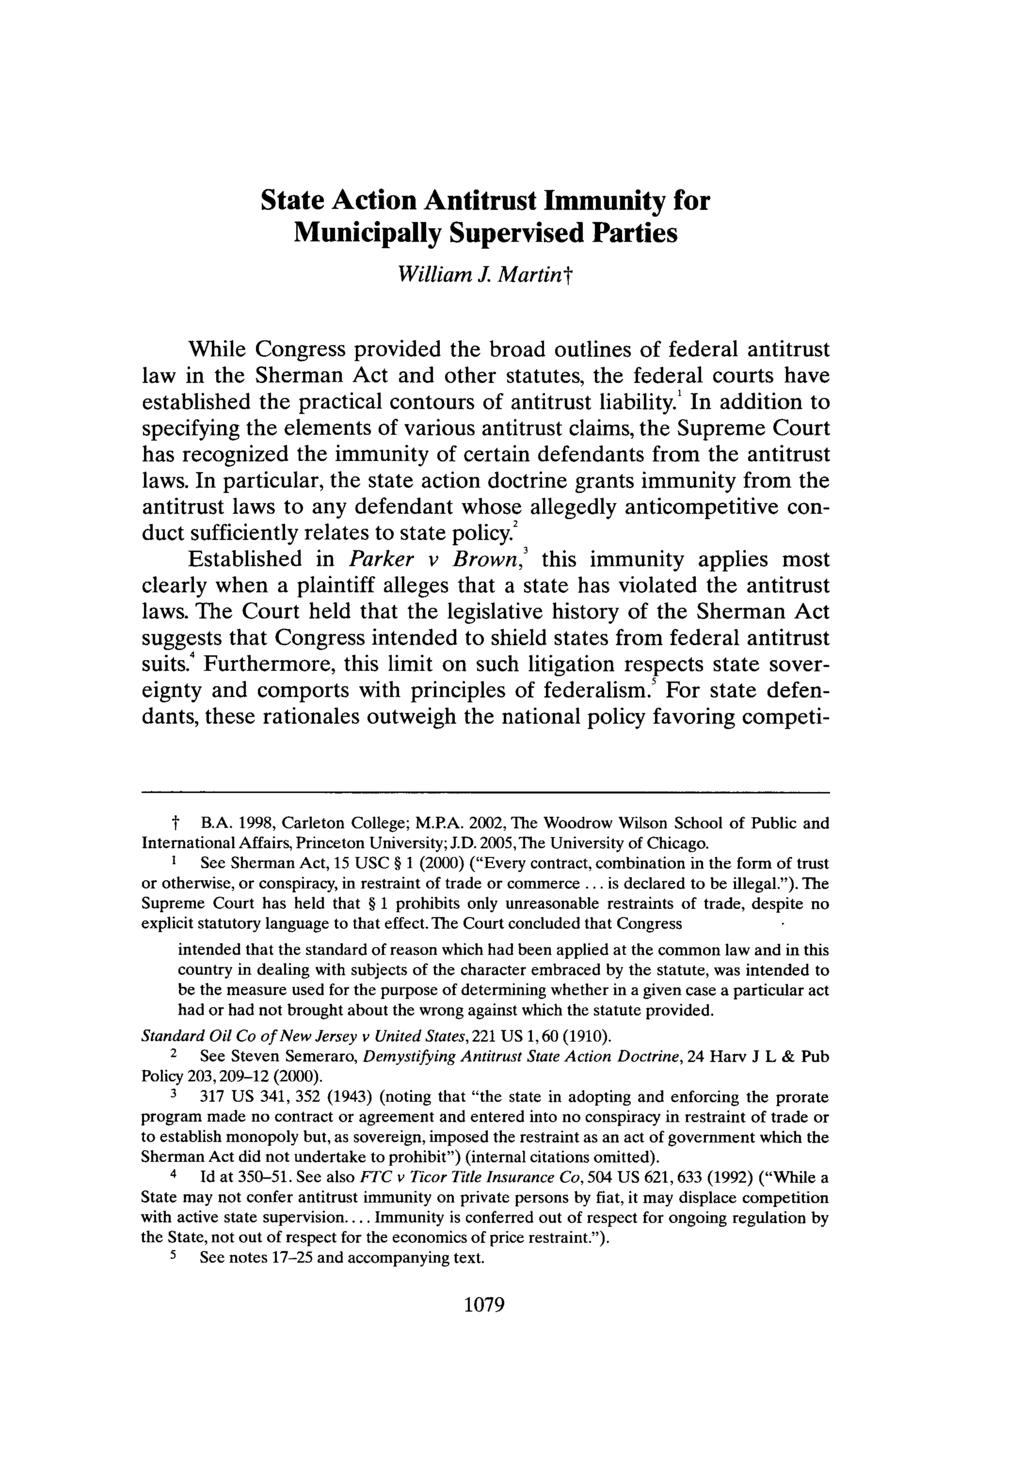 State Action Antitrust Immunity for Municipally Supervised Parties William J Martint While Congress provided the broad outlines of federal antitrust law in the Sherman Act and other statutes, the